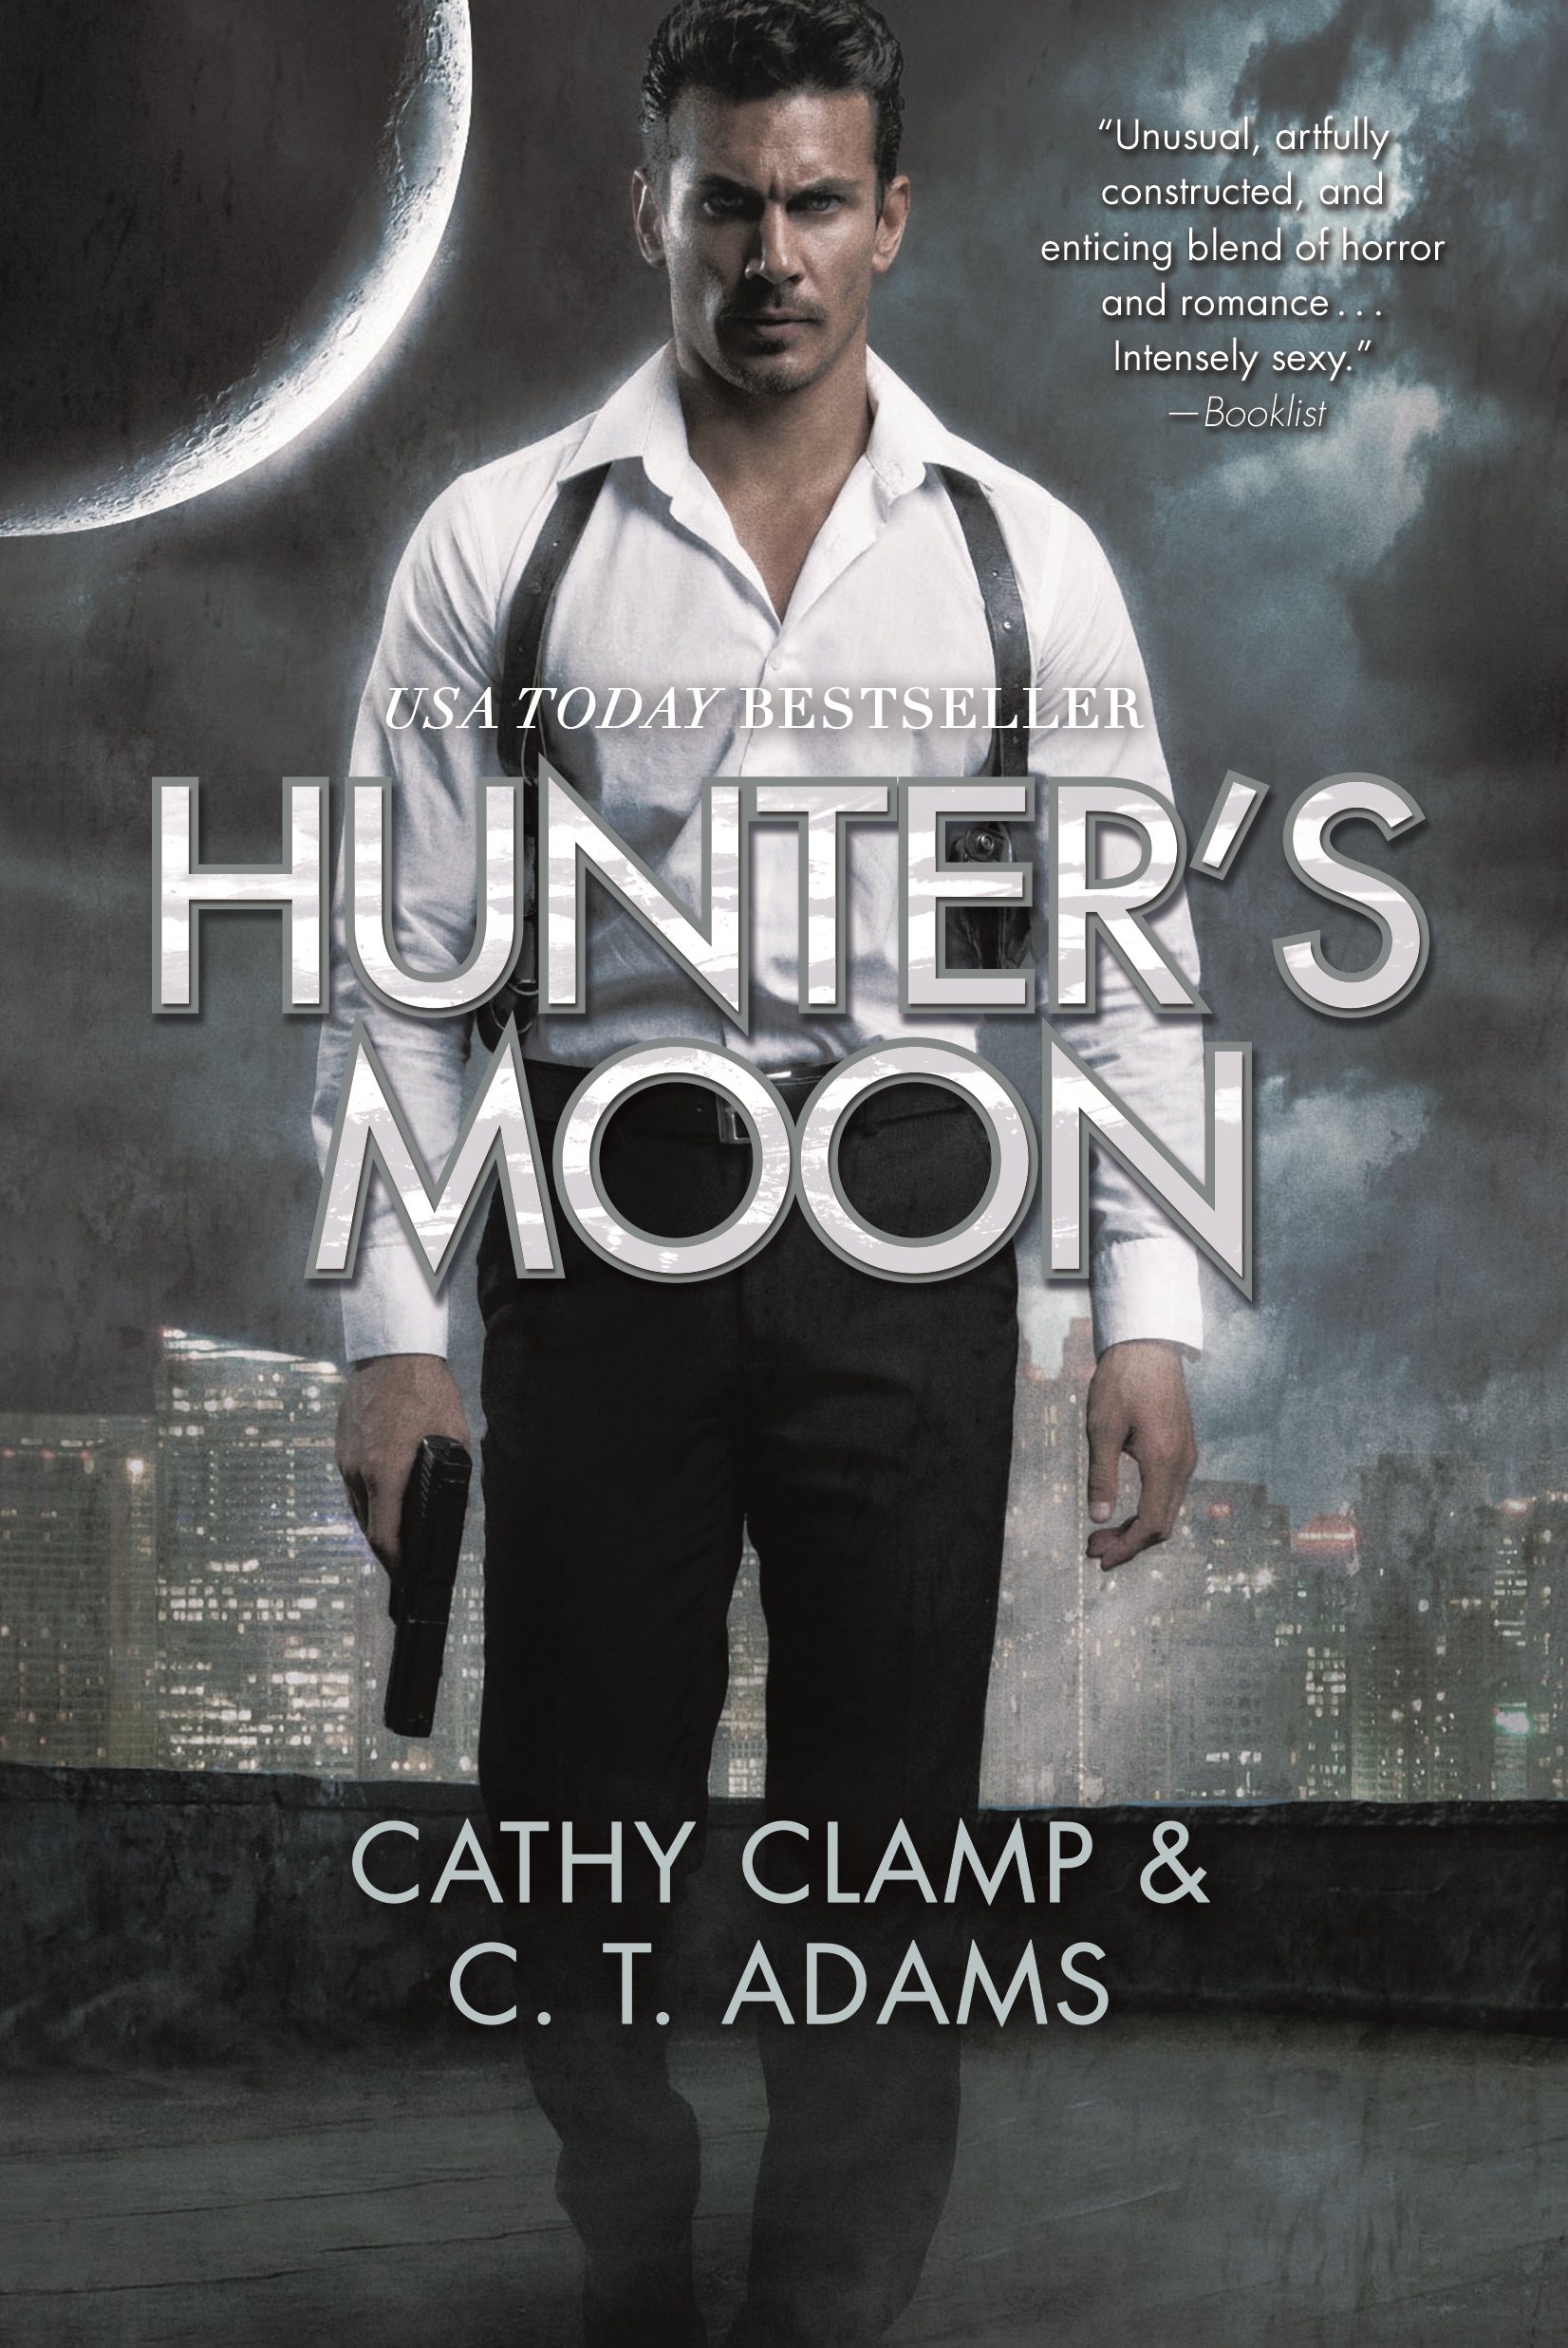 Hunter's Moon by Cathy Clamp, C.T. Adams